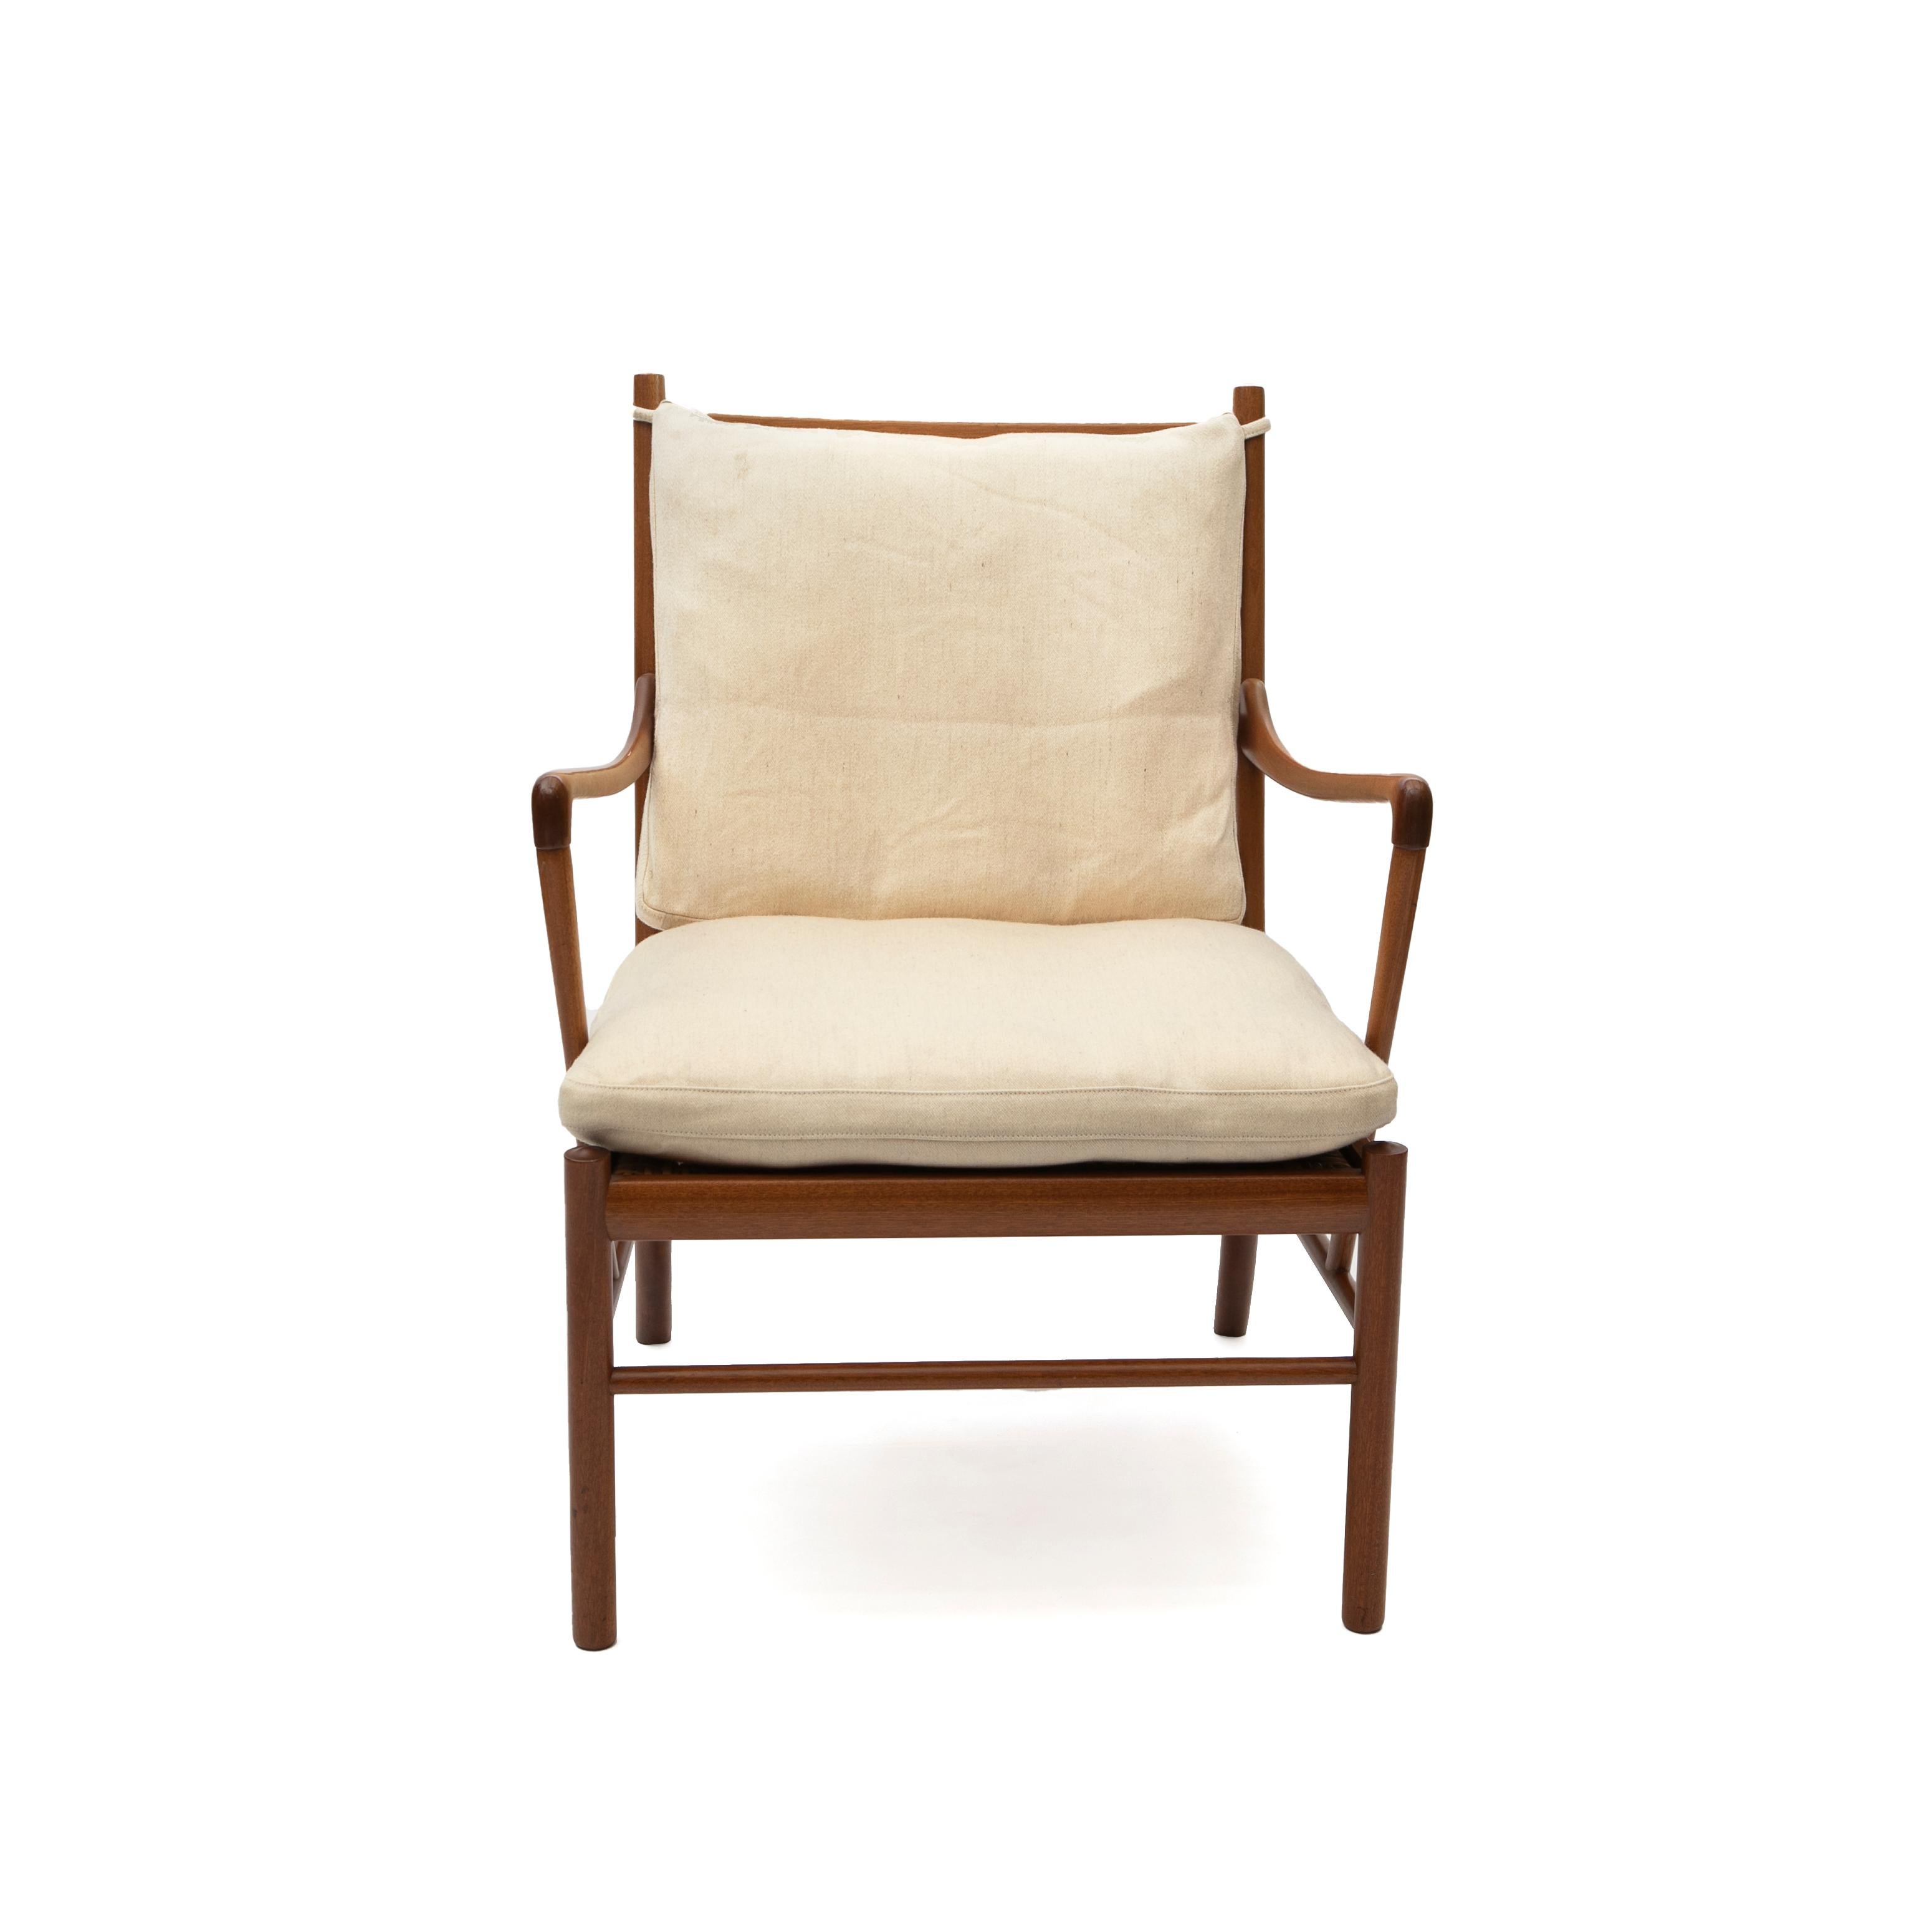 Ole Wanscher 1903-1985.
Ole Wanscher's Colonial Chair and ottoman in solid mahogany.
Woven rattan cane seat and cushions covered in light Greenland wool.

Produced by Poul Jeppesen in Denmark circa 1980.

In good original and untouched